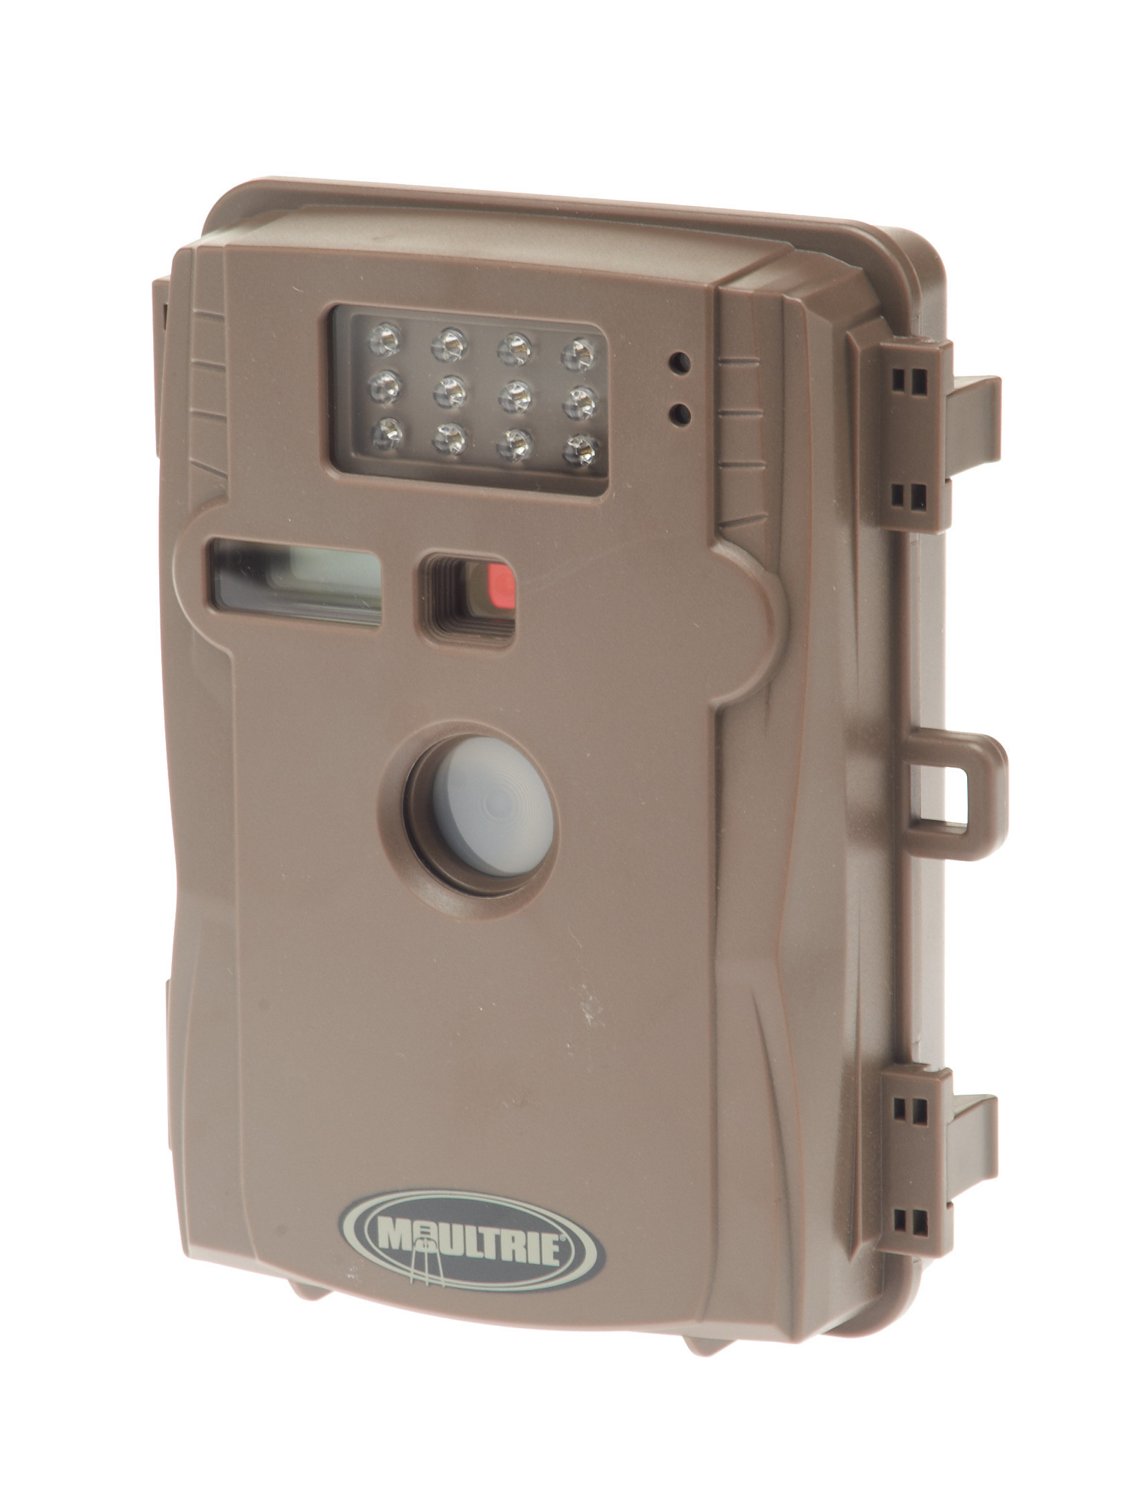 moultrie camera manual